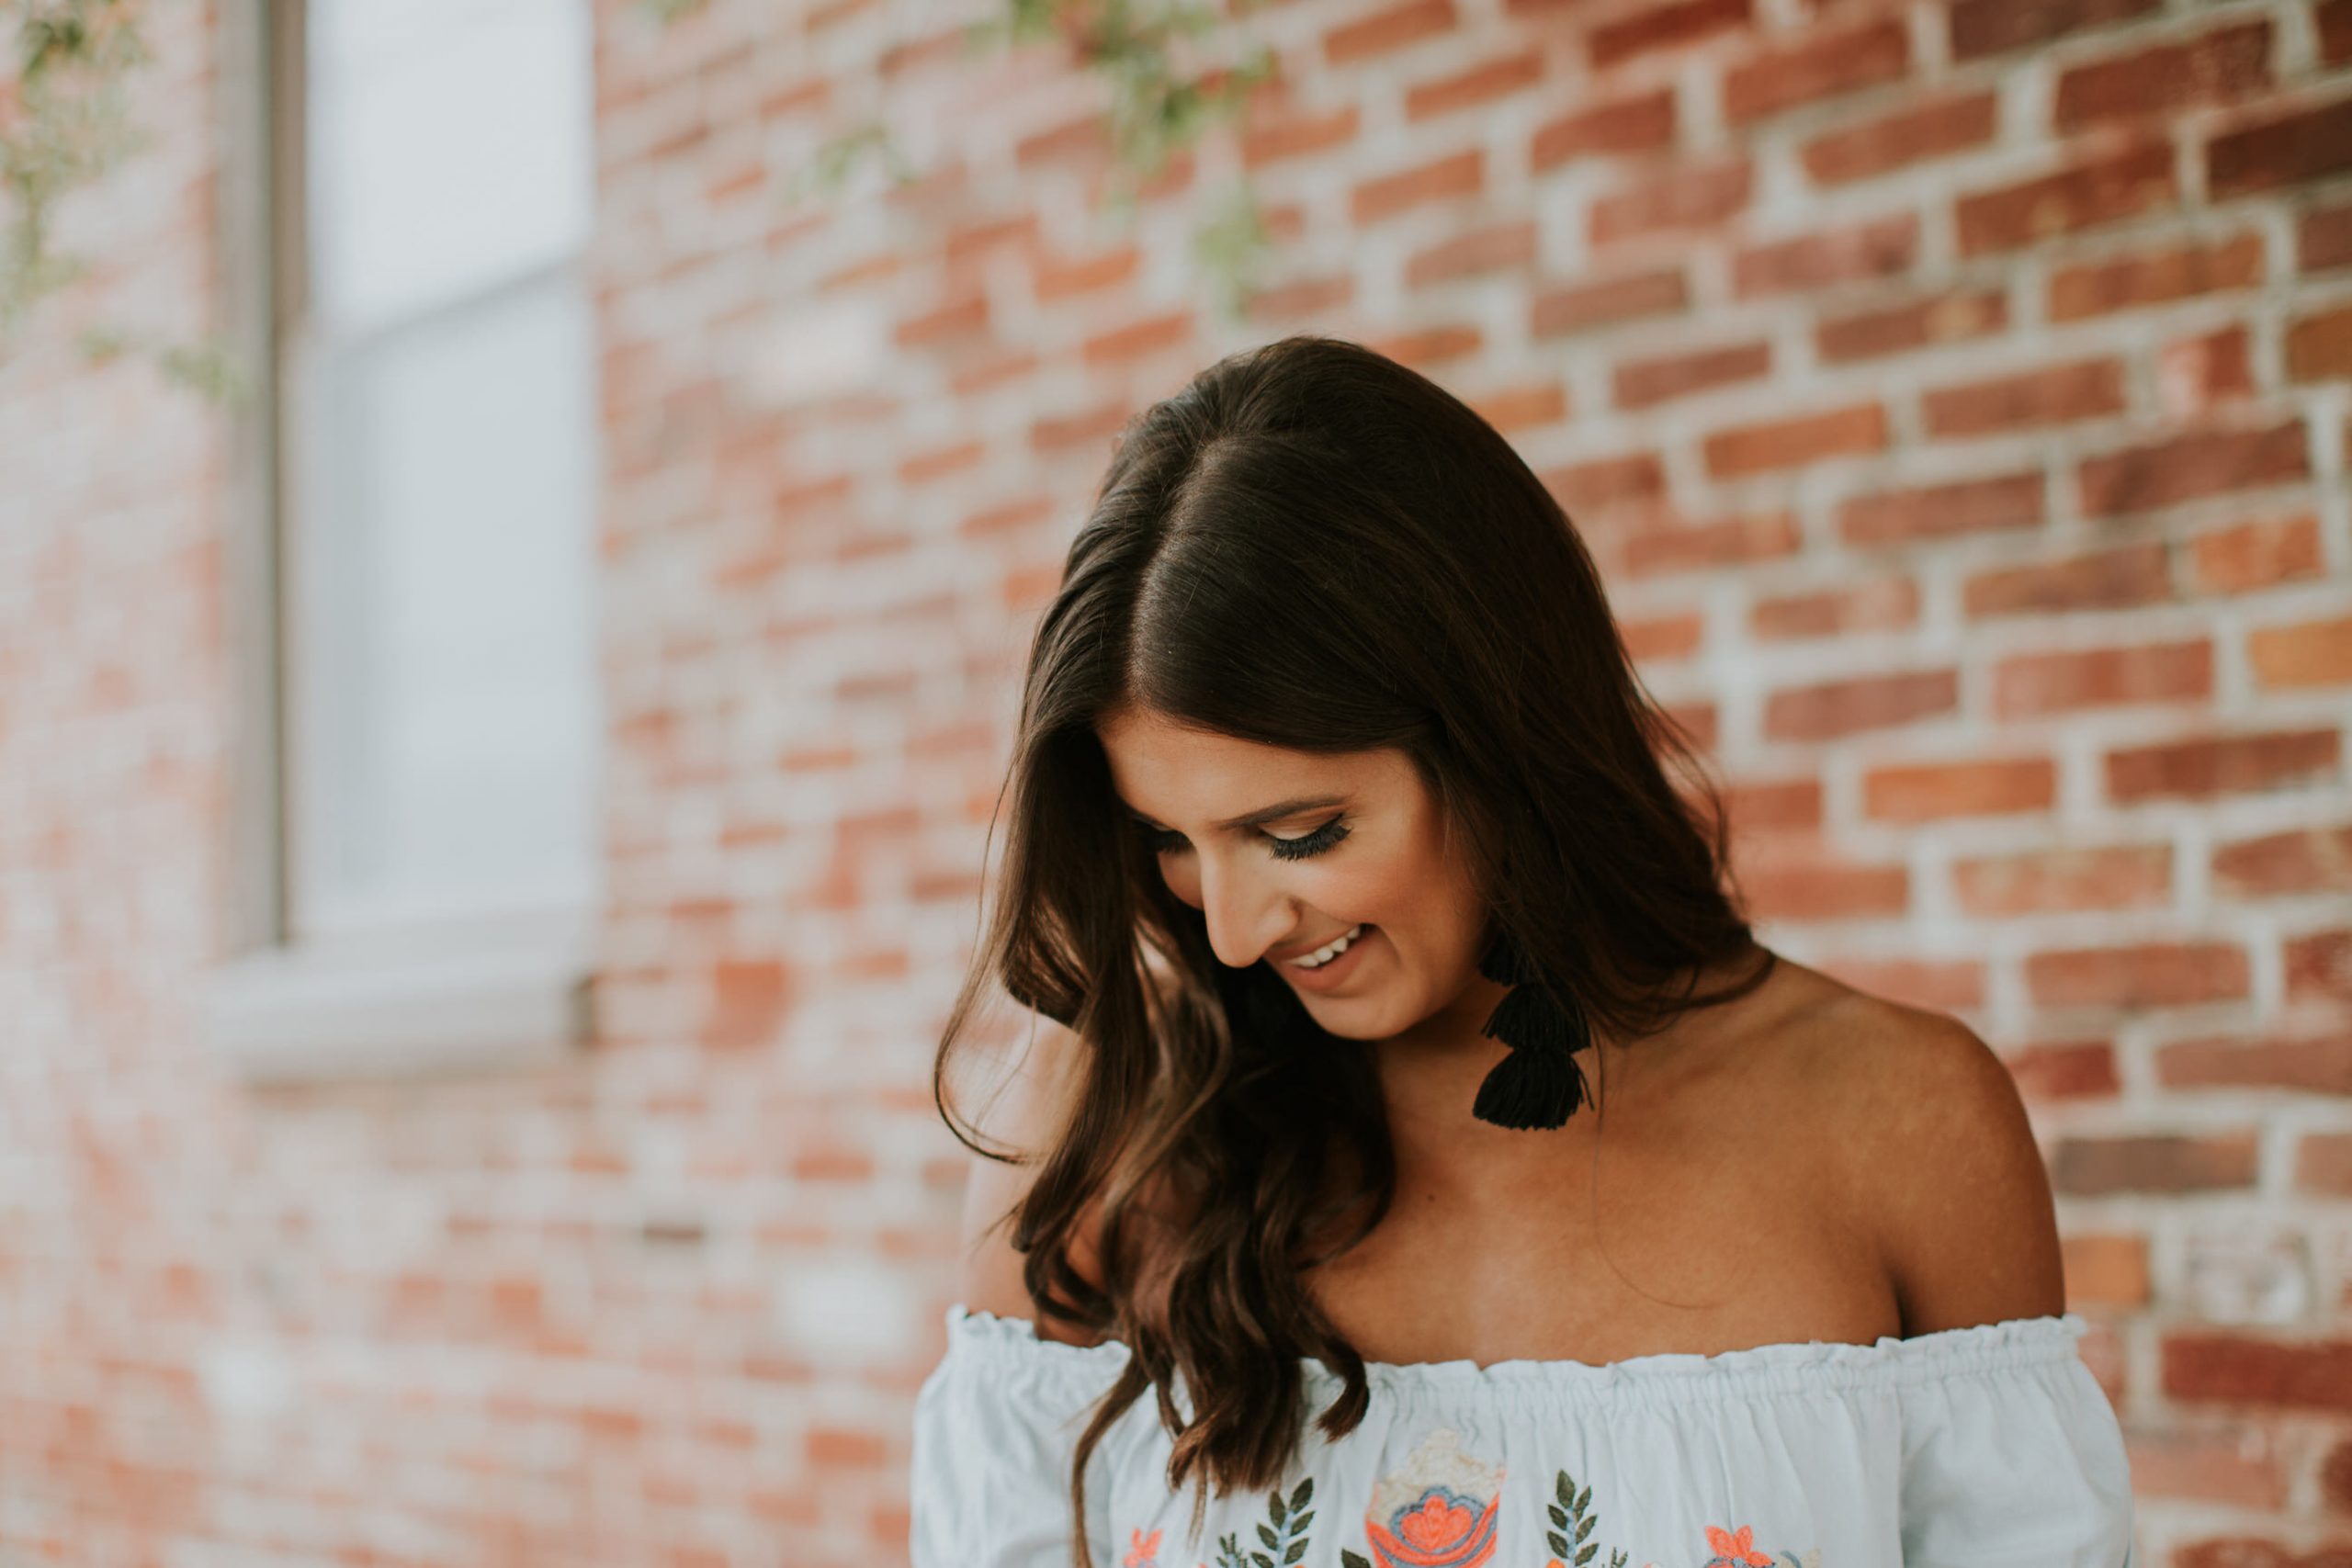 off the shoulder embroidered dress, free people embroidered dress, free people dresses, pink clutch, monogram clutch, misa tassel earrings, gigi new york clutch, summer outfit, summer style, summer fashion, summer outfits // grace wainwright a southern drawl